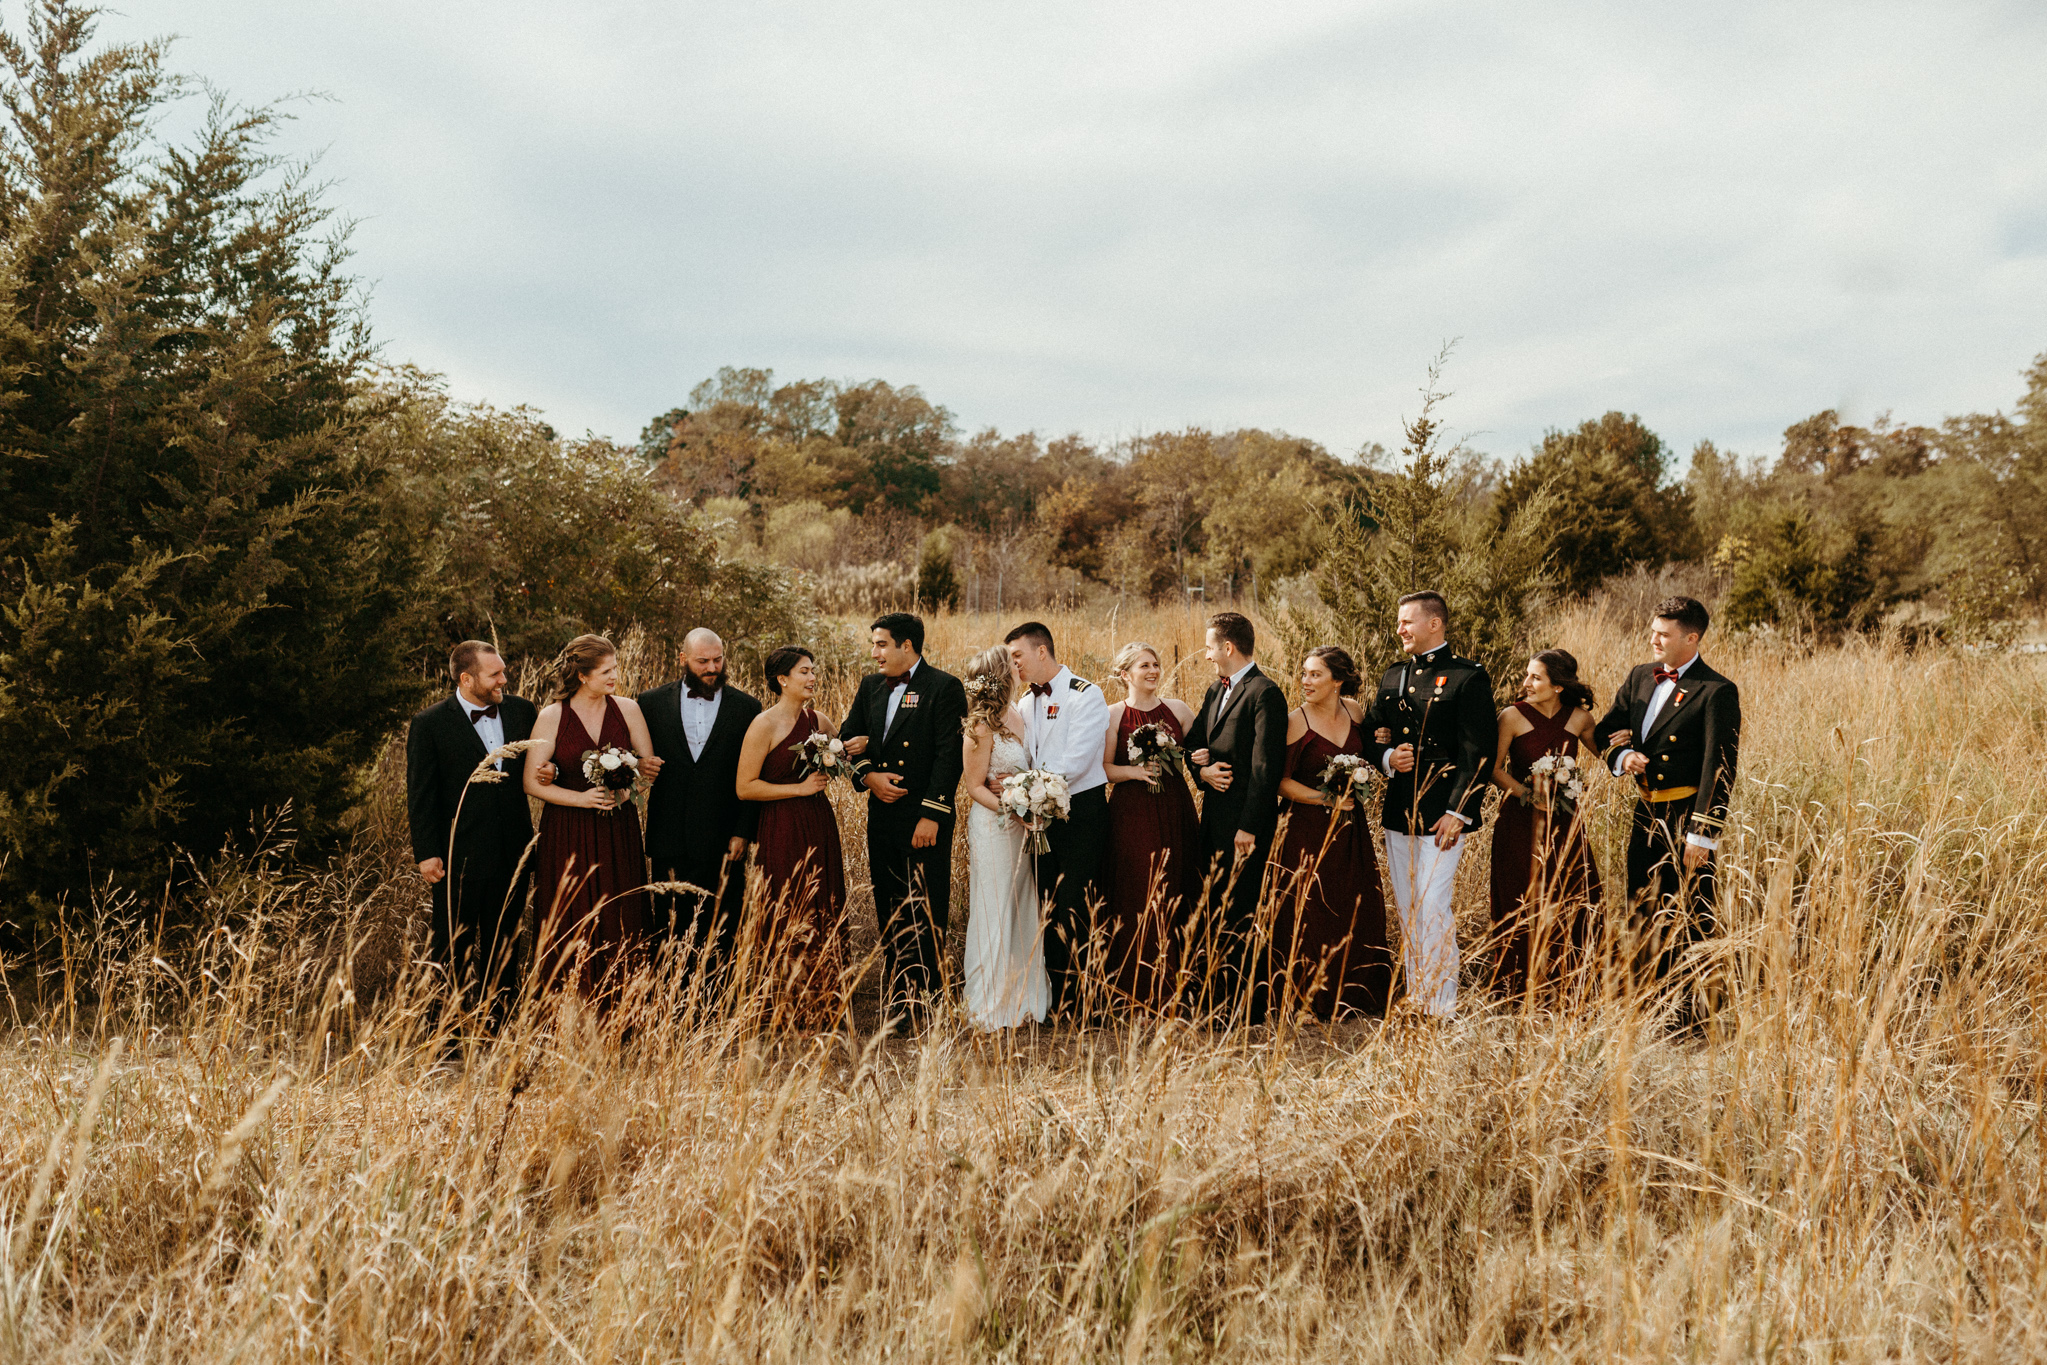 Relaxed, Outdoorsy Fall Wedding At The Chesapeake Bay Foundation // Victoria Selman Photographer